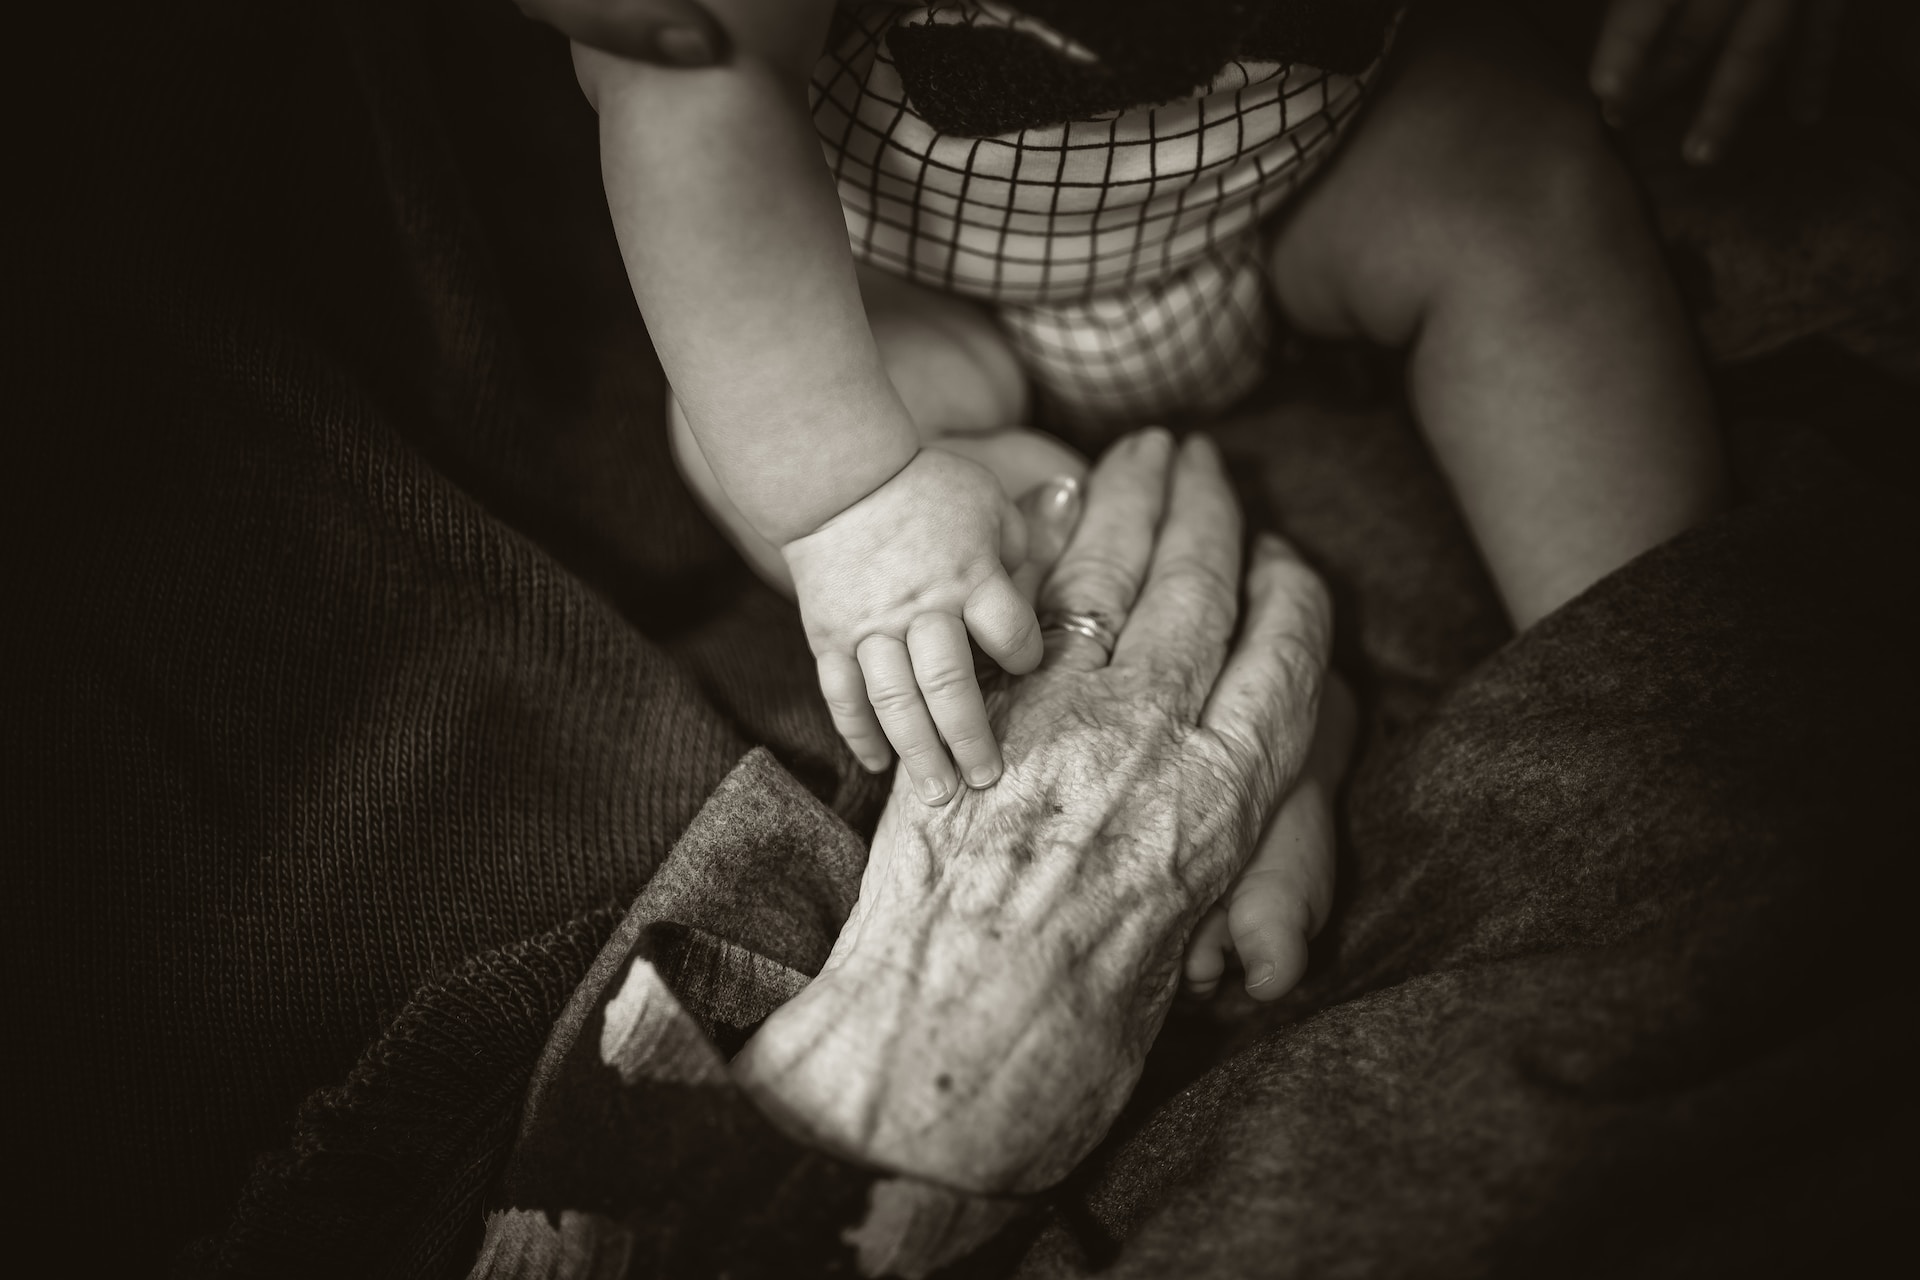 Senior Care: The Most Important things for Caregivers to Remember When Caring for the Elderly